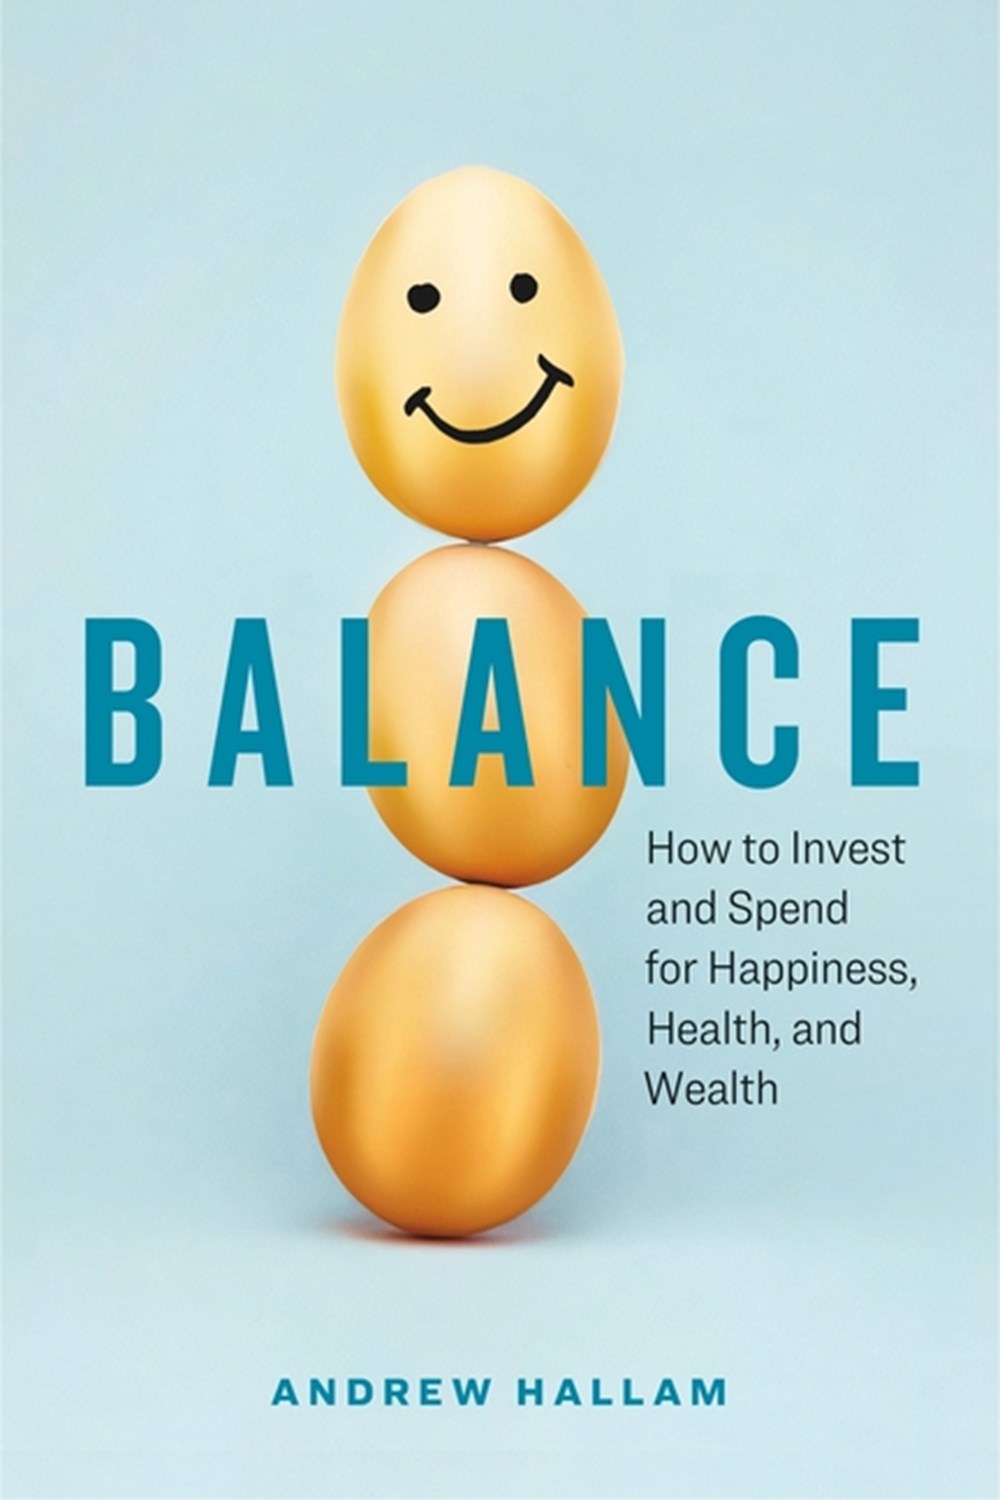 Balance How to Invest and Spend for Happiness, Health, and Wealth